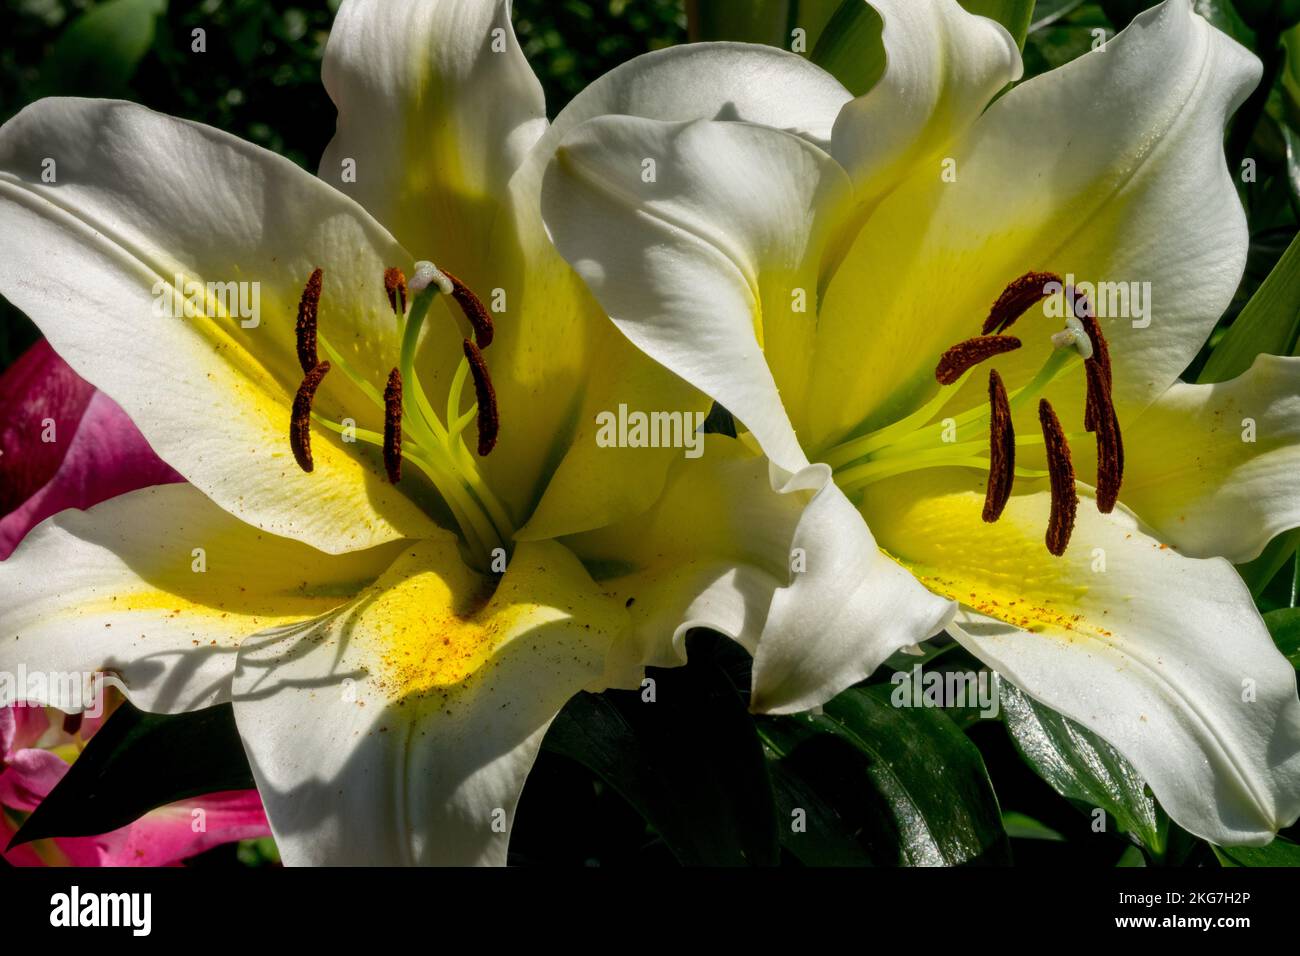 White Lilium 'Budlight' Beautiful Lilies Blooms Fiori Bicolored Blooming Lily White Yellow Flower Cultivar OT Hybrid Long-Living Bicolor Foto Stock